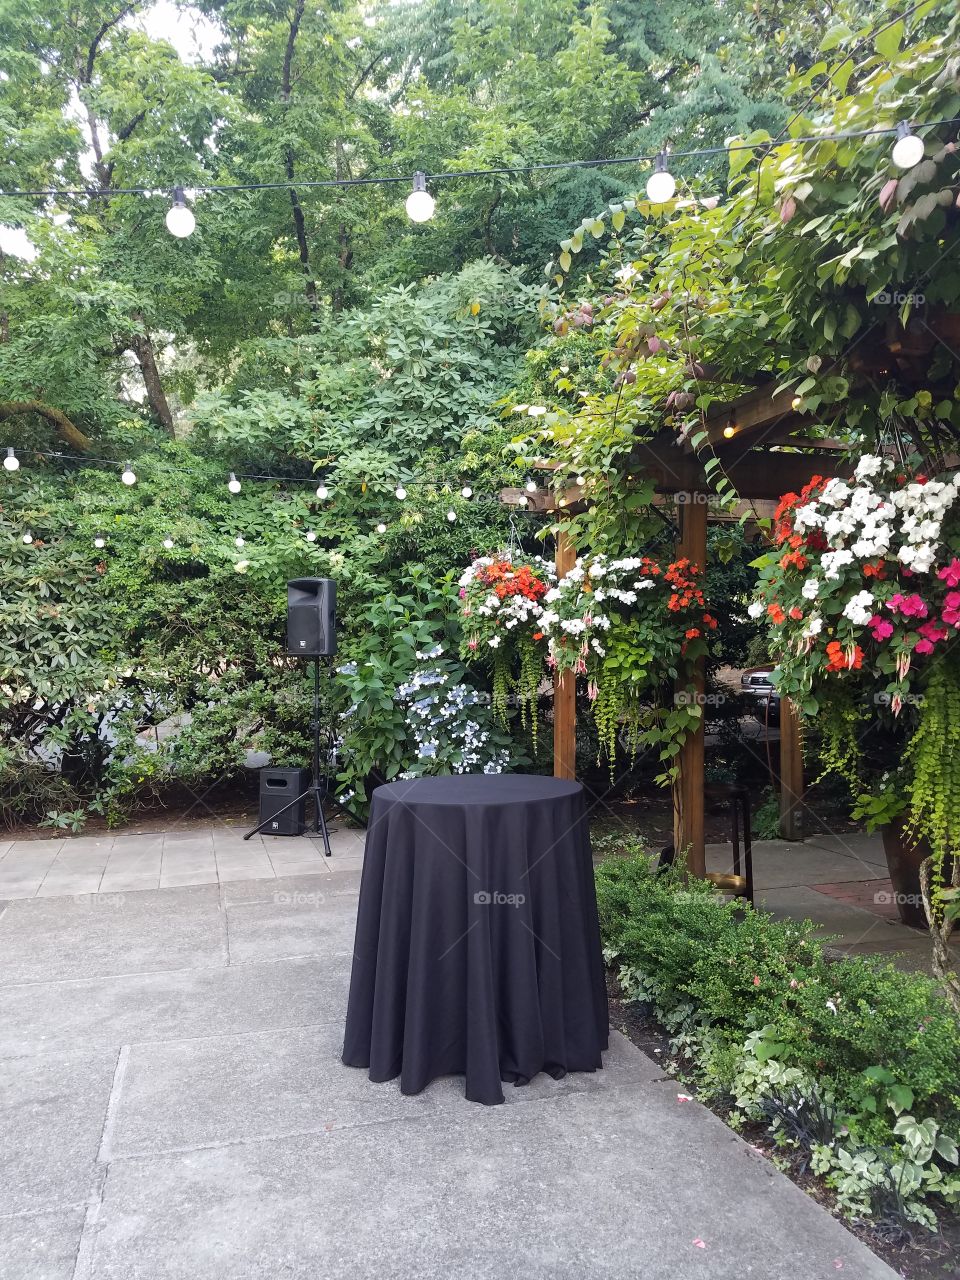 Cocktail table at an outdoor garden summer wedding with string lights and flowers on a patio